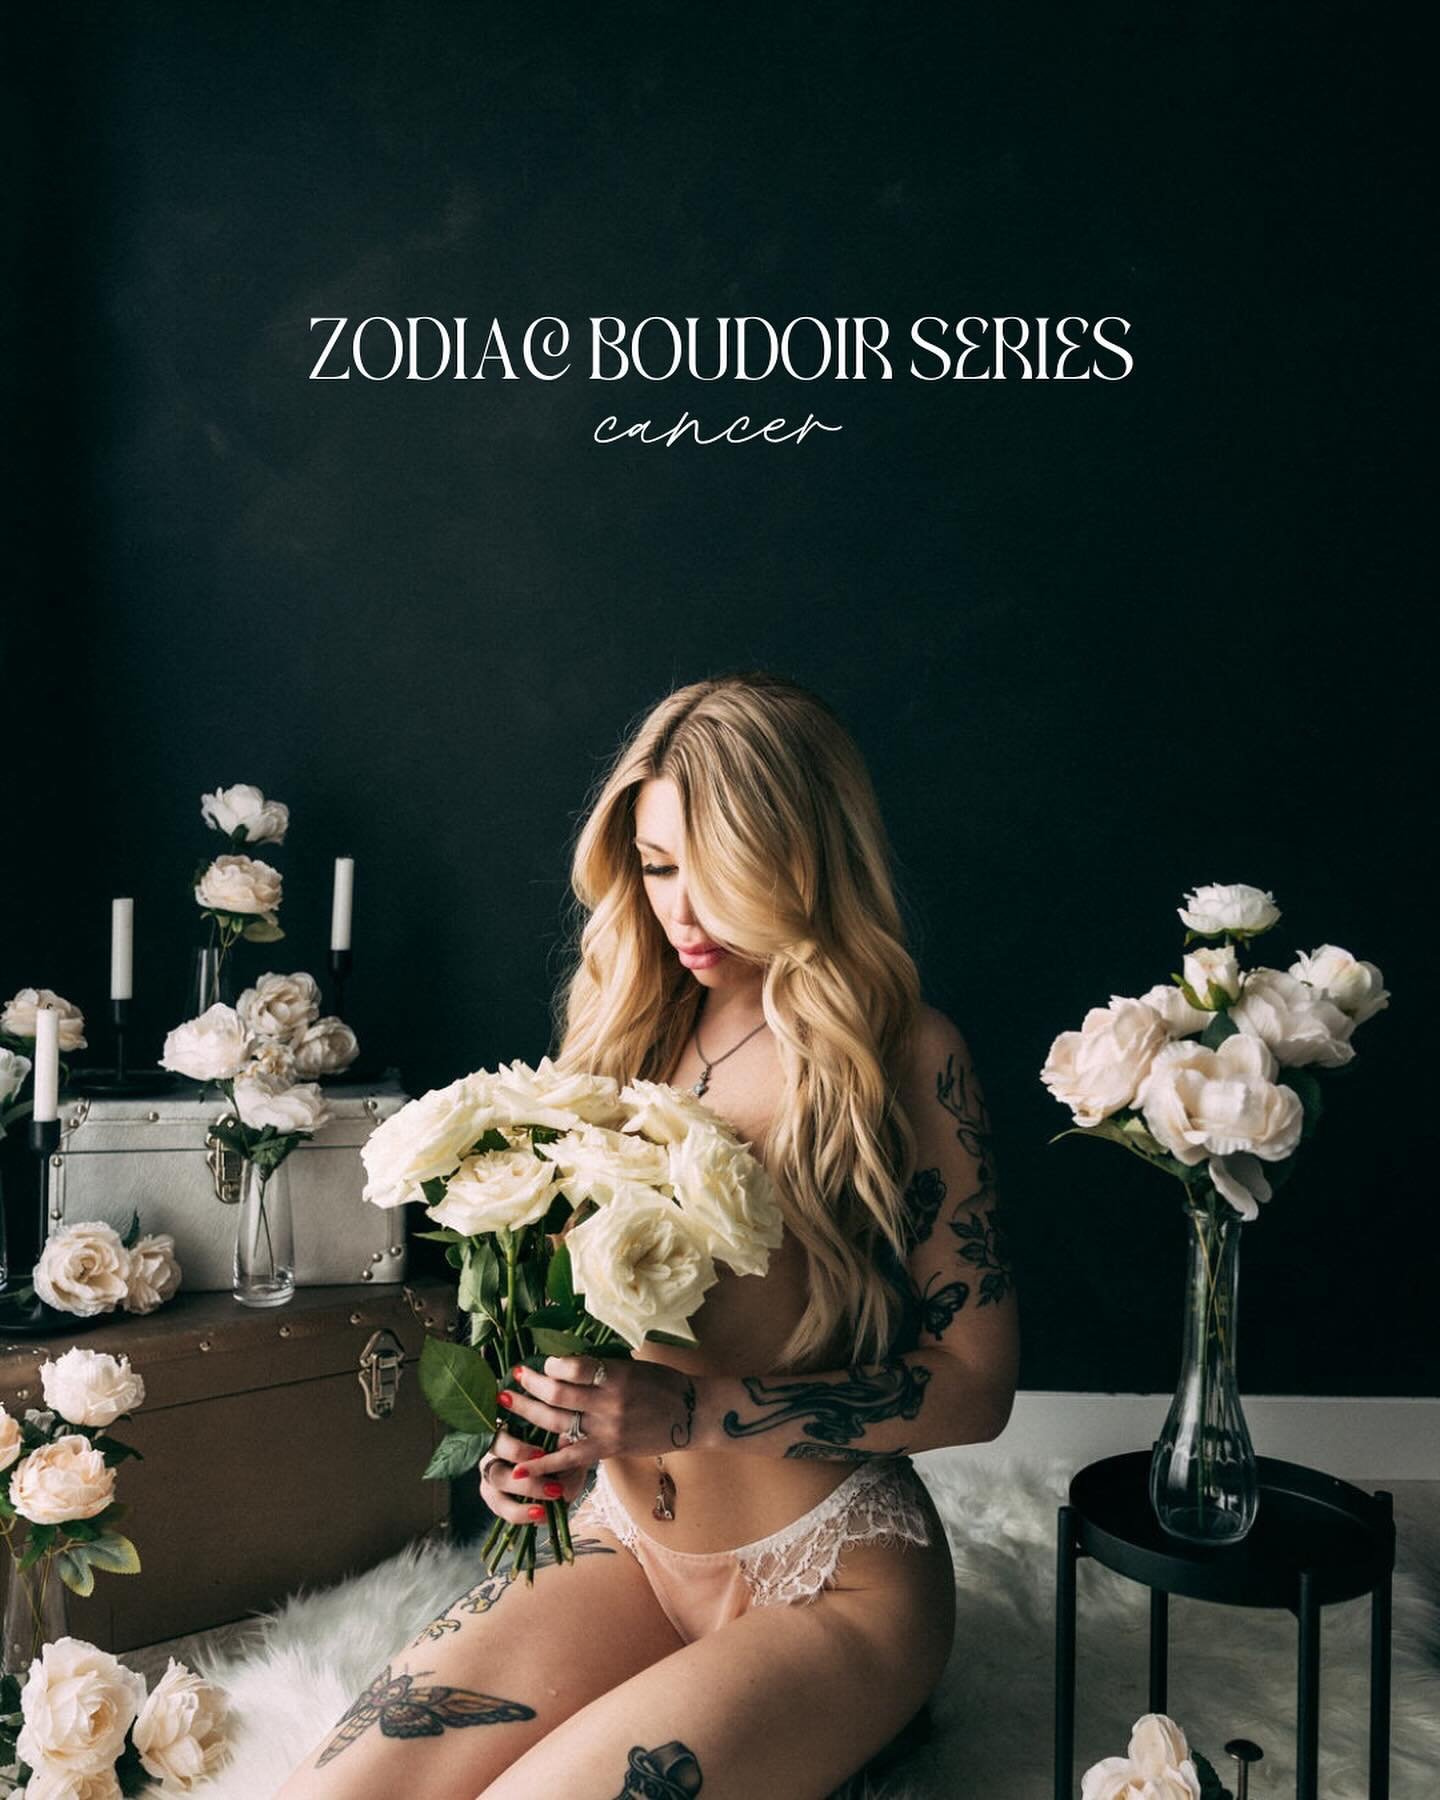 ZODIAC BOUDIEEE SERIES 🦁🦀

I am looking for ✨12✨ women (1 per sign) who are interested in having a Zodiac Boudoir Series Photoshoot. You will get the full boudoir experience plus the exclusive themed set 👏🏼

⚡️Read the ENTIRE CAPTION to find out 